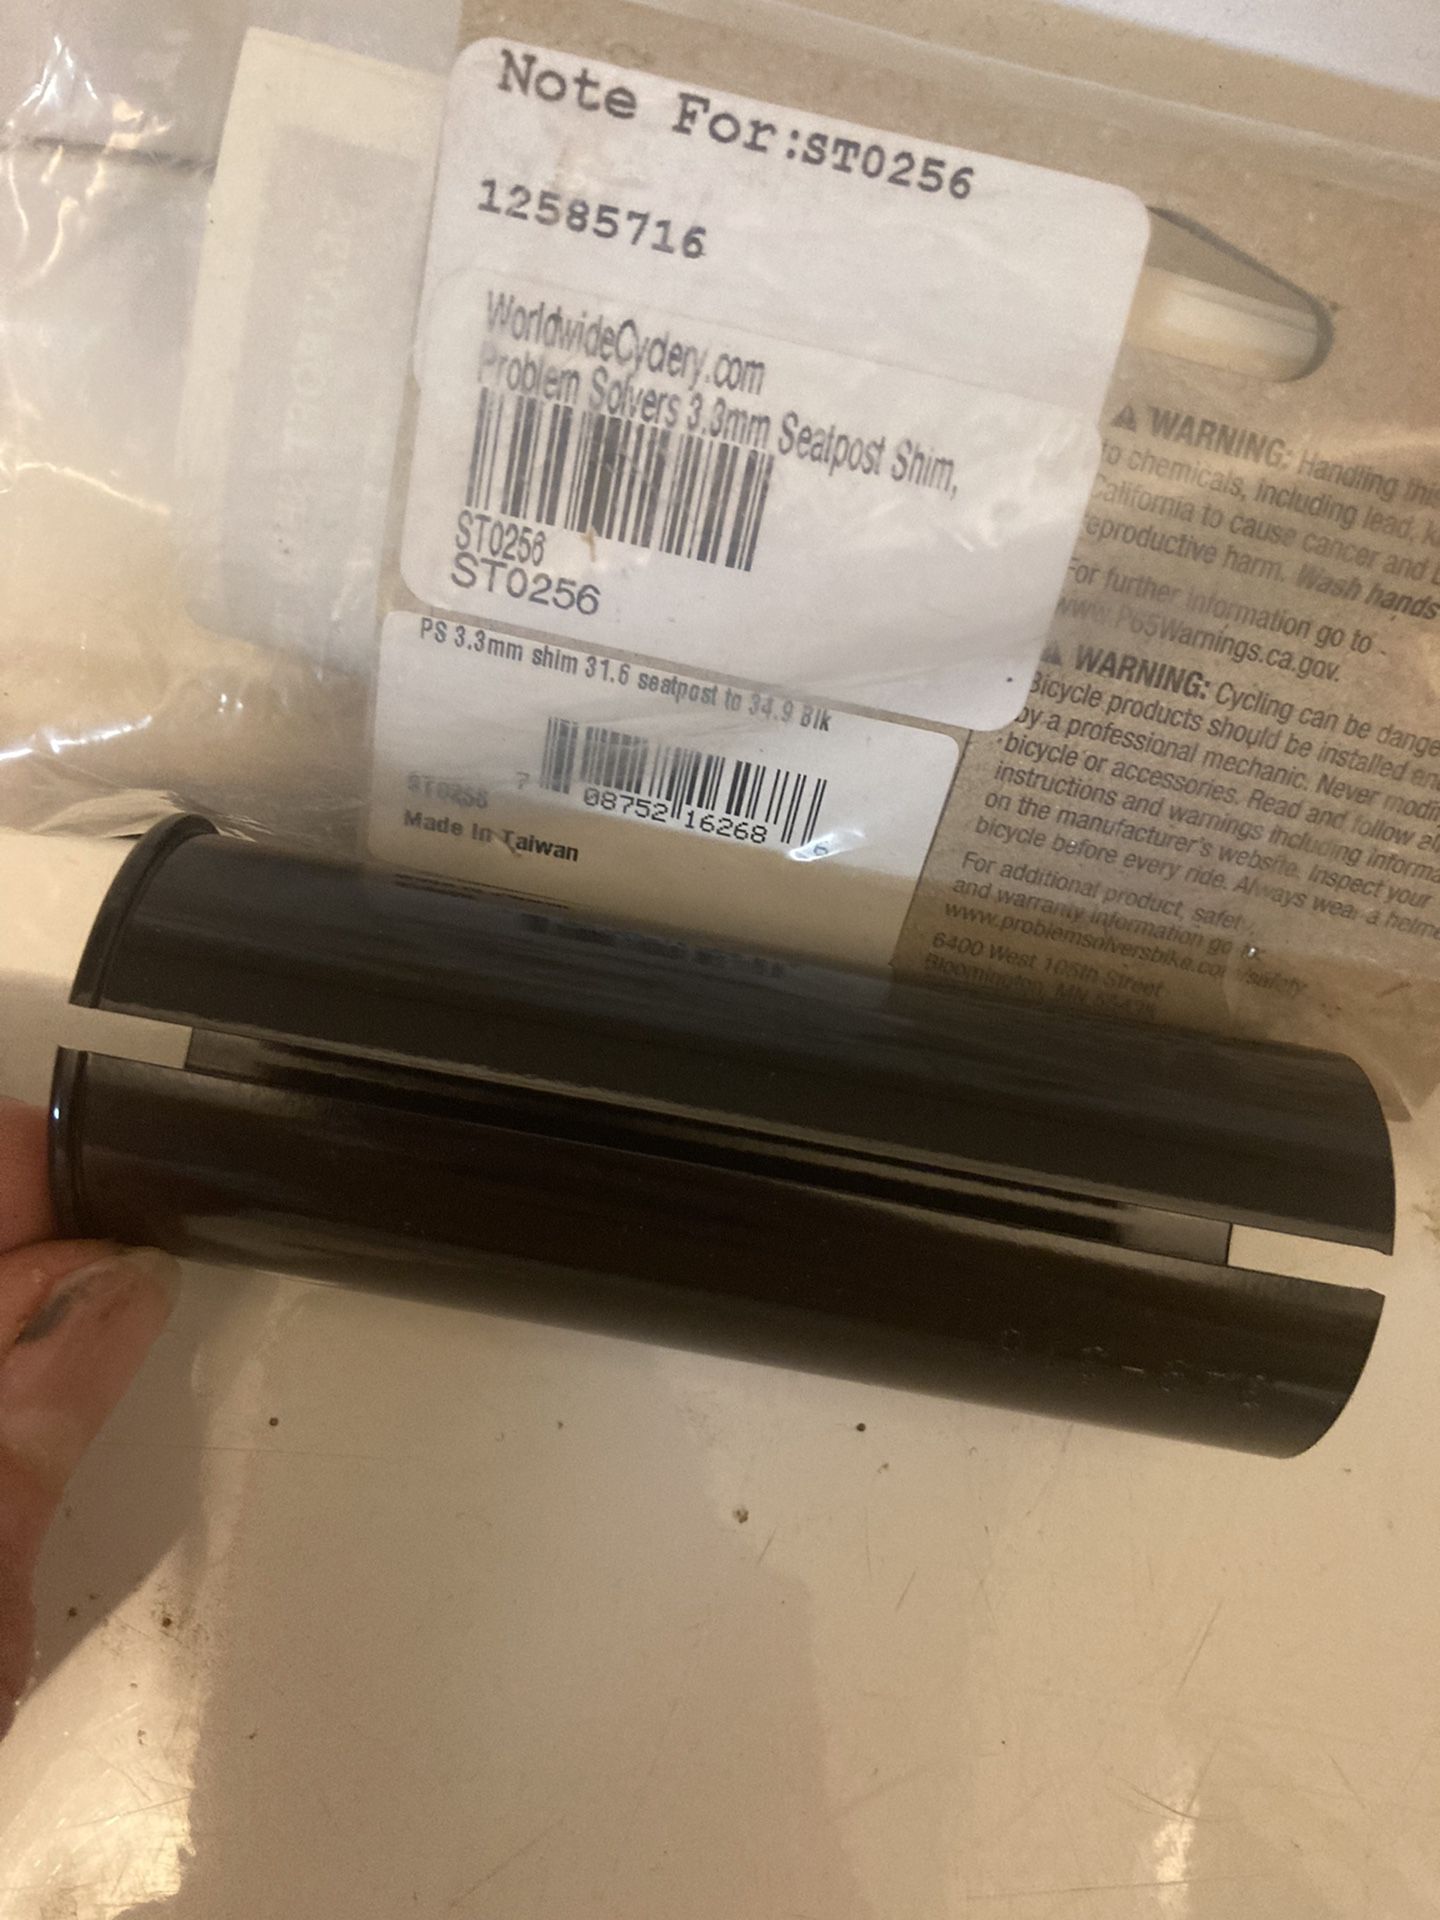 seatpost shim, 3.3mm 31.6 to 34.9